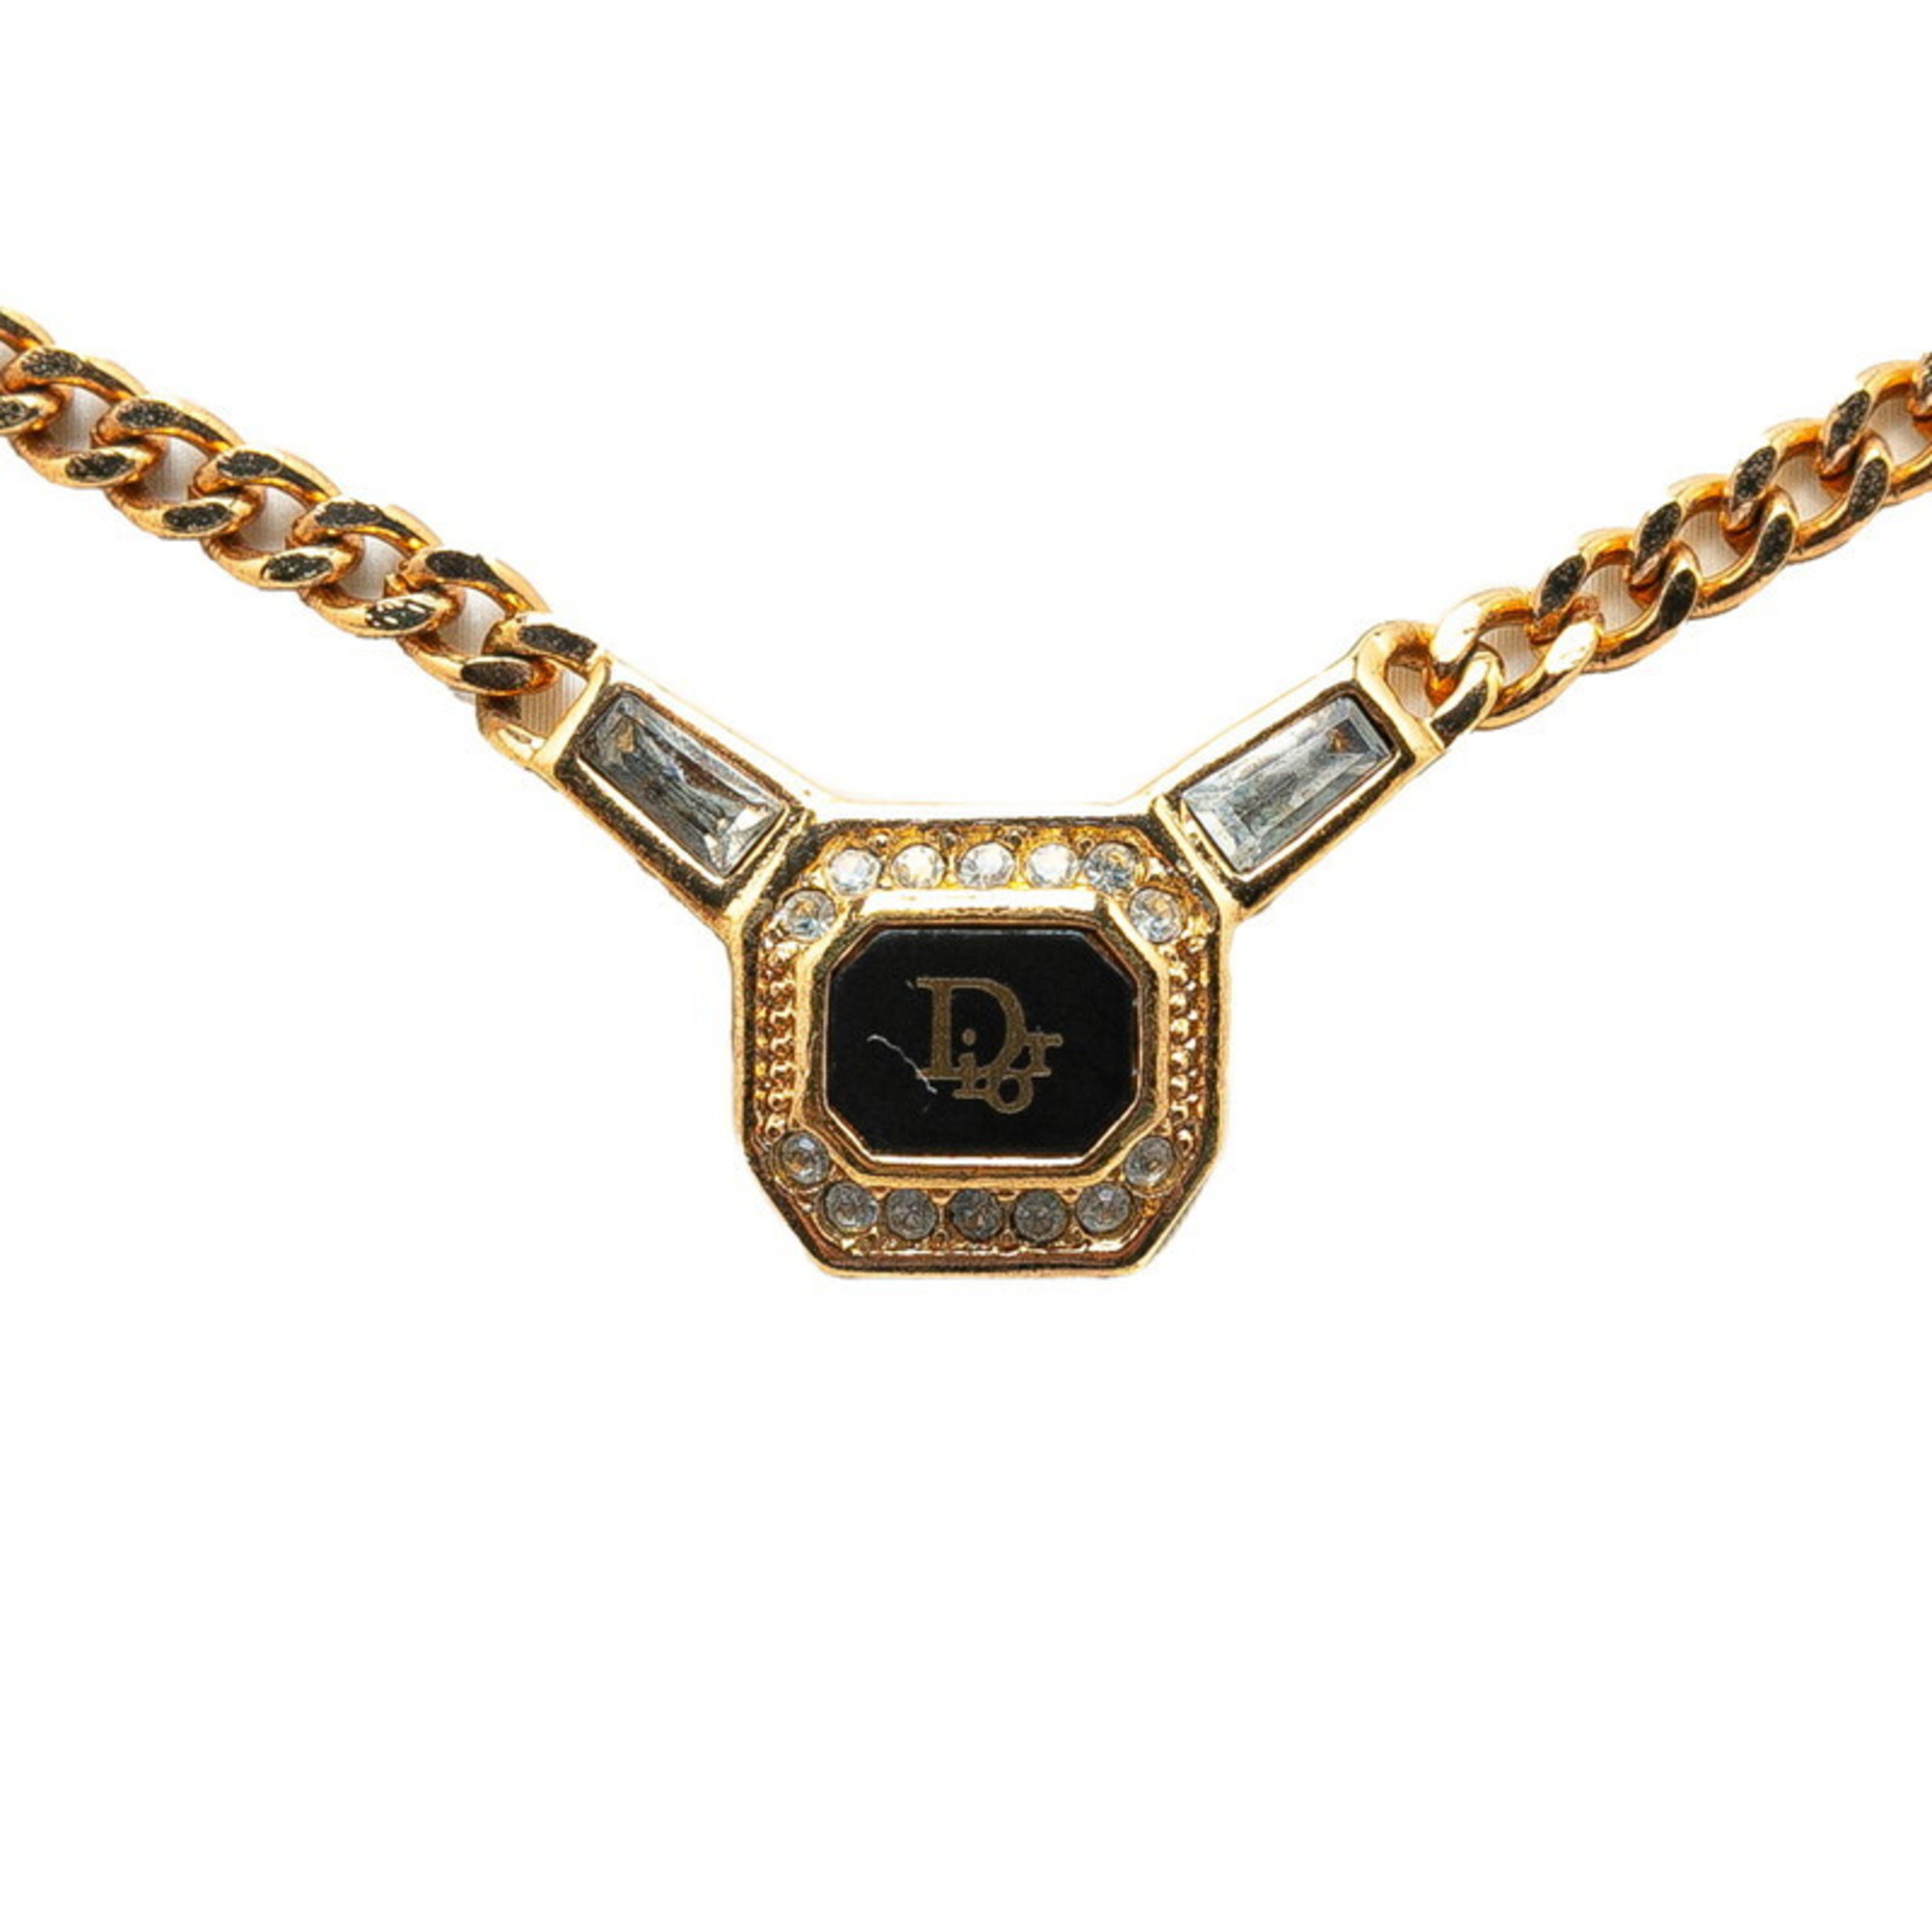 Christian Dior Dior Rhinestone Necklace Gold Plated Women's